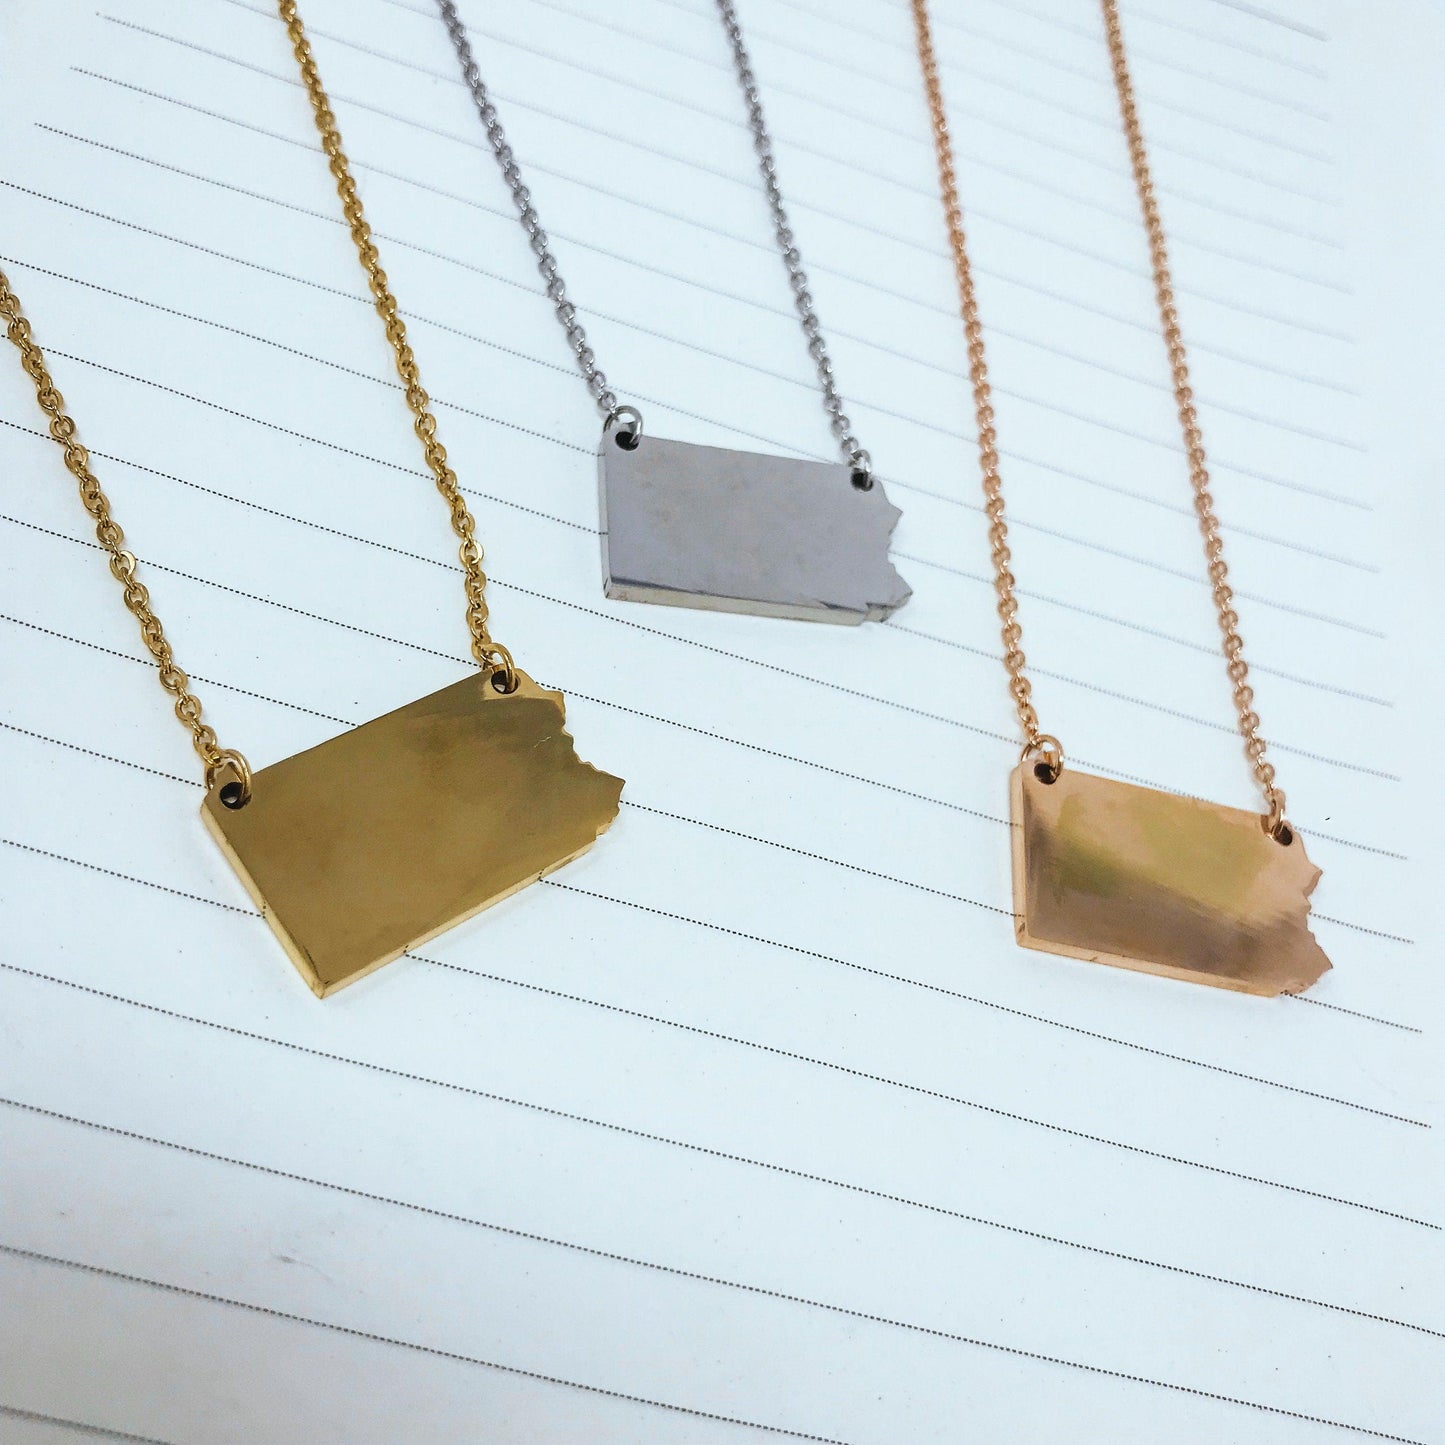 Pennsylvania State Silhouette Necklaces in 3 different colors: Gold, Silver & Rose Gold